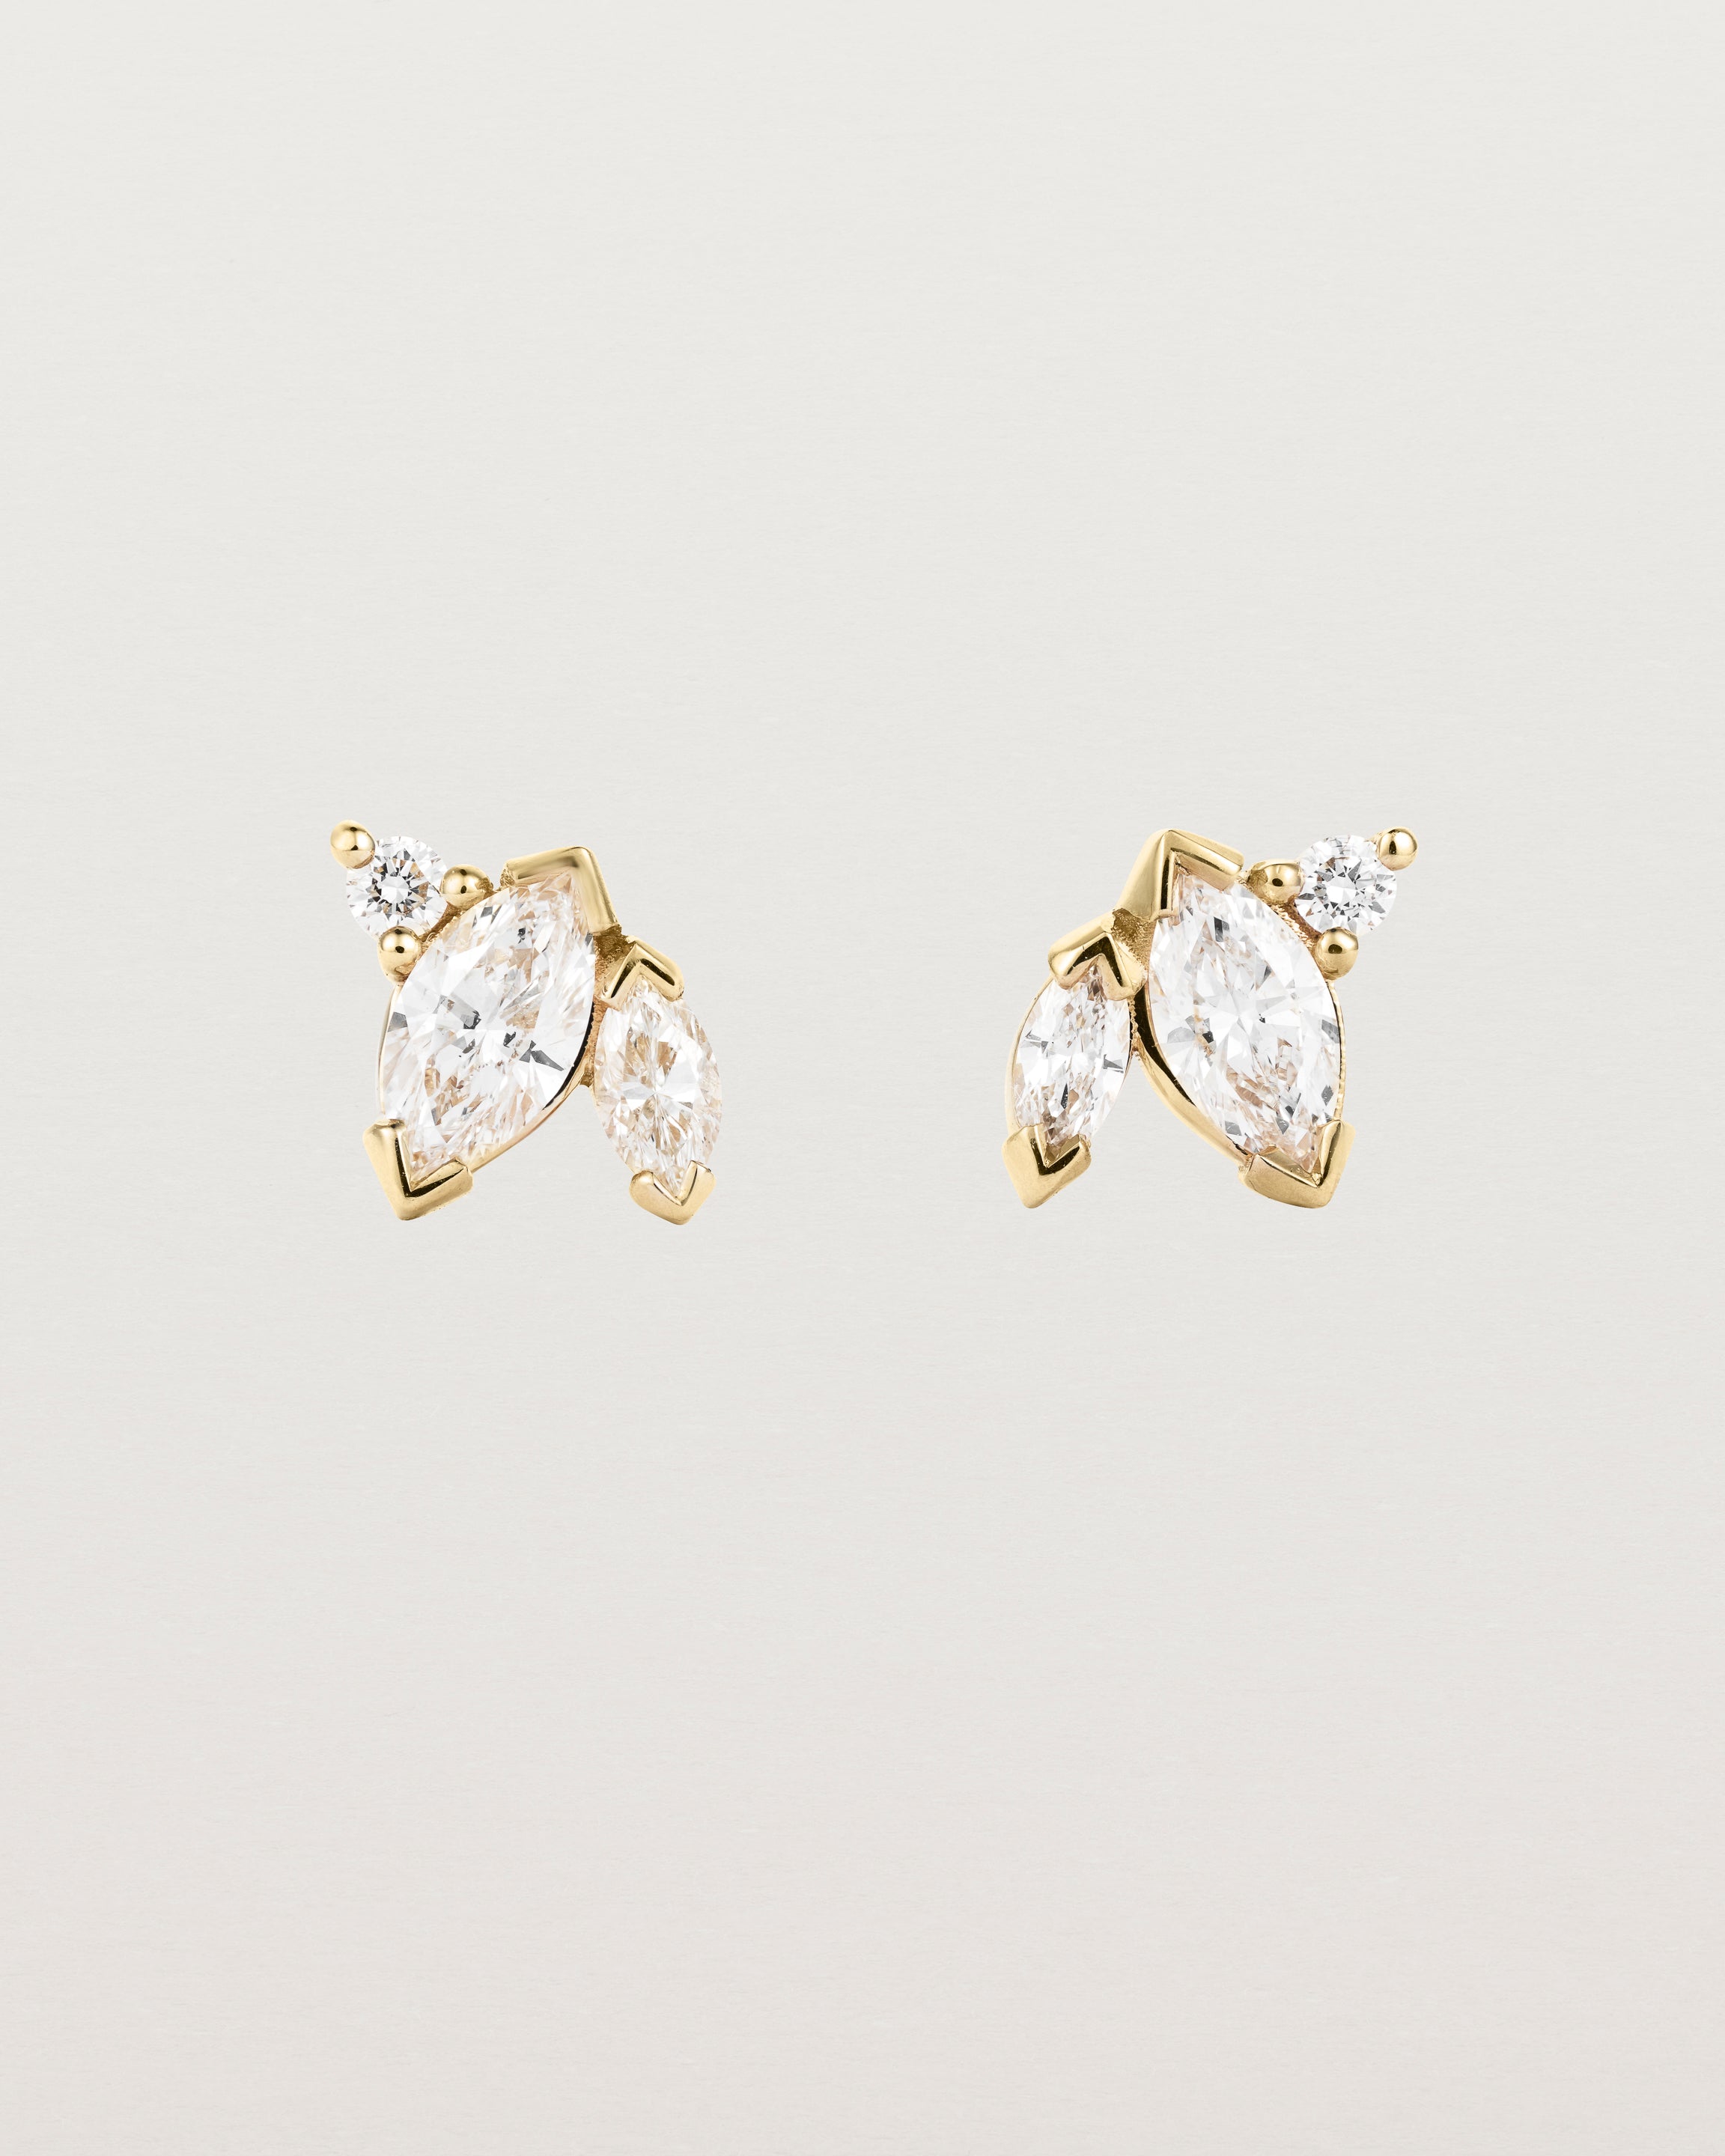 A pair of yellow gold studs featuring two marquise and one round diamond